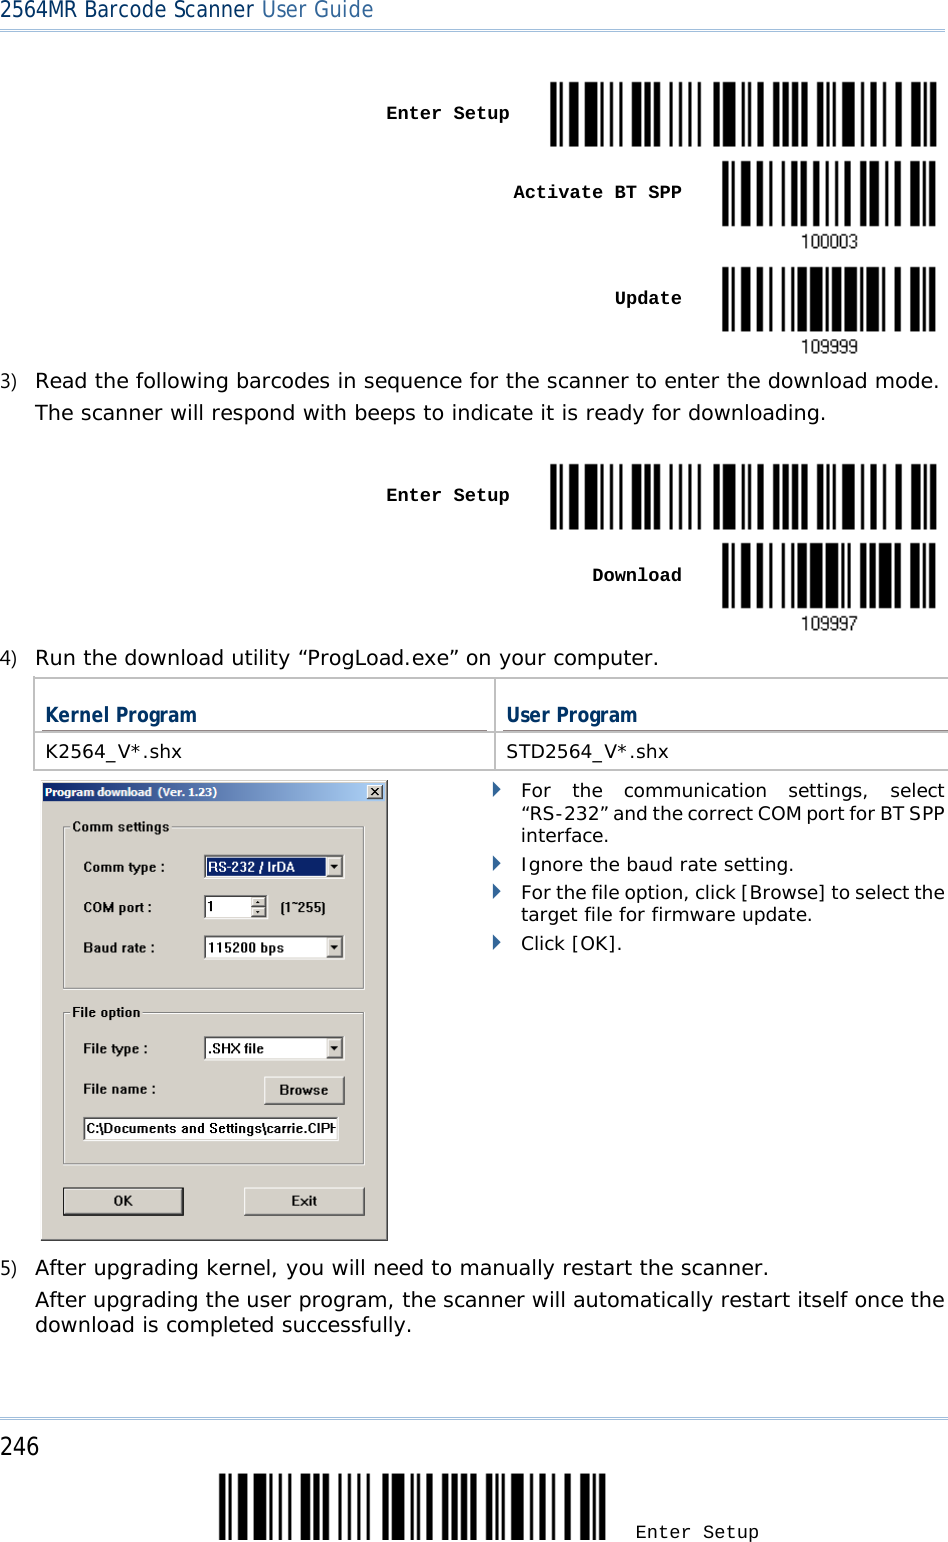 2564MR Barcode Scanner User Guide    Enter Setup     Activate BT SPP     Update  3) Read the following barcodes in sequence for the scanner to enter the download mode.  The scanner will respond with beeps to indicate it is ready for downloading.    Enter Setup     Download  4) Run the download utility “ProgLoad.exe” on your computer.  Kernel Program User Program K2564_V*.shx STD2564_V*.shx         For the communication settings, select “RS-232” and the correct COM port for BT SPP interface.  Ignore the baud rate setting.  For the file option, click [Browse] to select the target file for firmware update.   Click [OK]. 5) After upgrading kernel, you will need to manually restart the scanner.      After upgrading the user program, the scanner will automatically restart itself once the download is completed successfully.   246 Enter Setup 